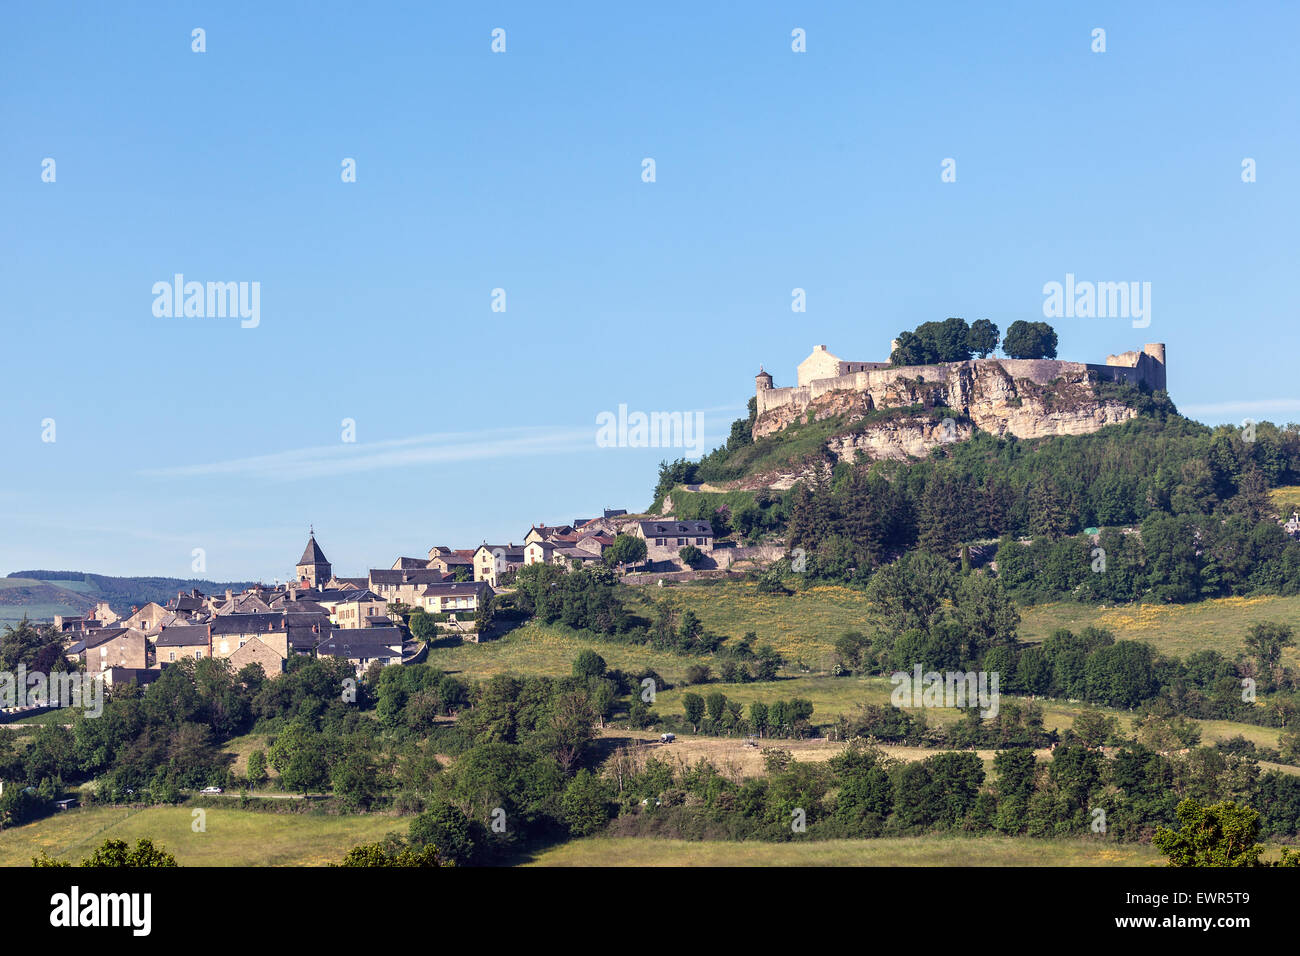 Village Severac-le-Chateau in Aveyron department, France Stock Photo ...